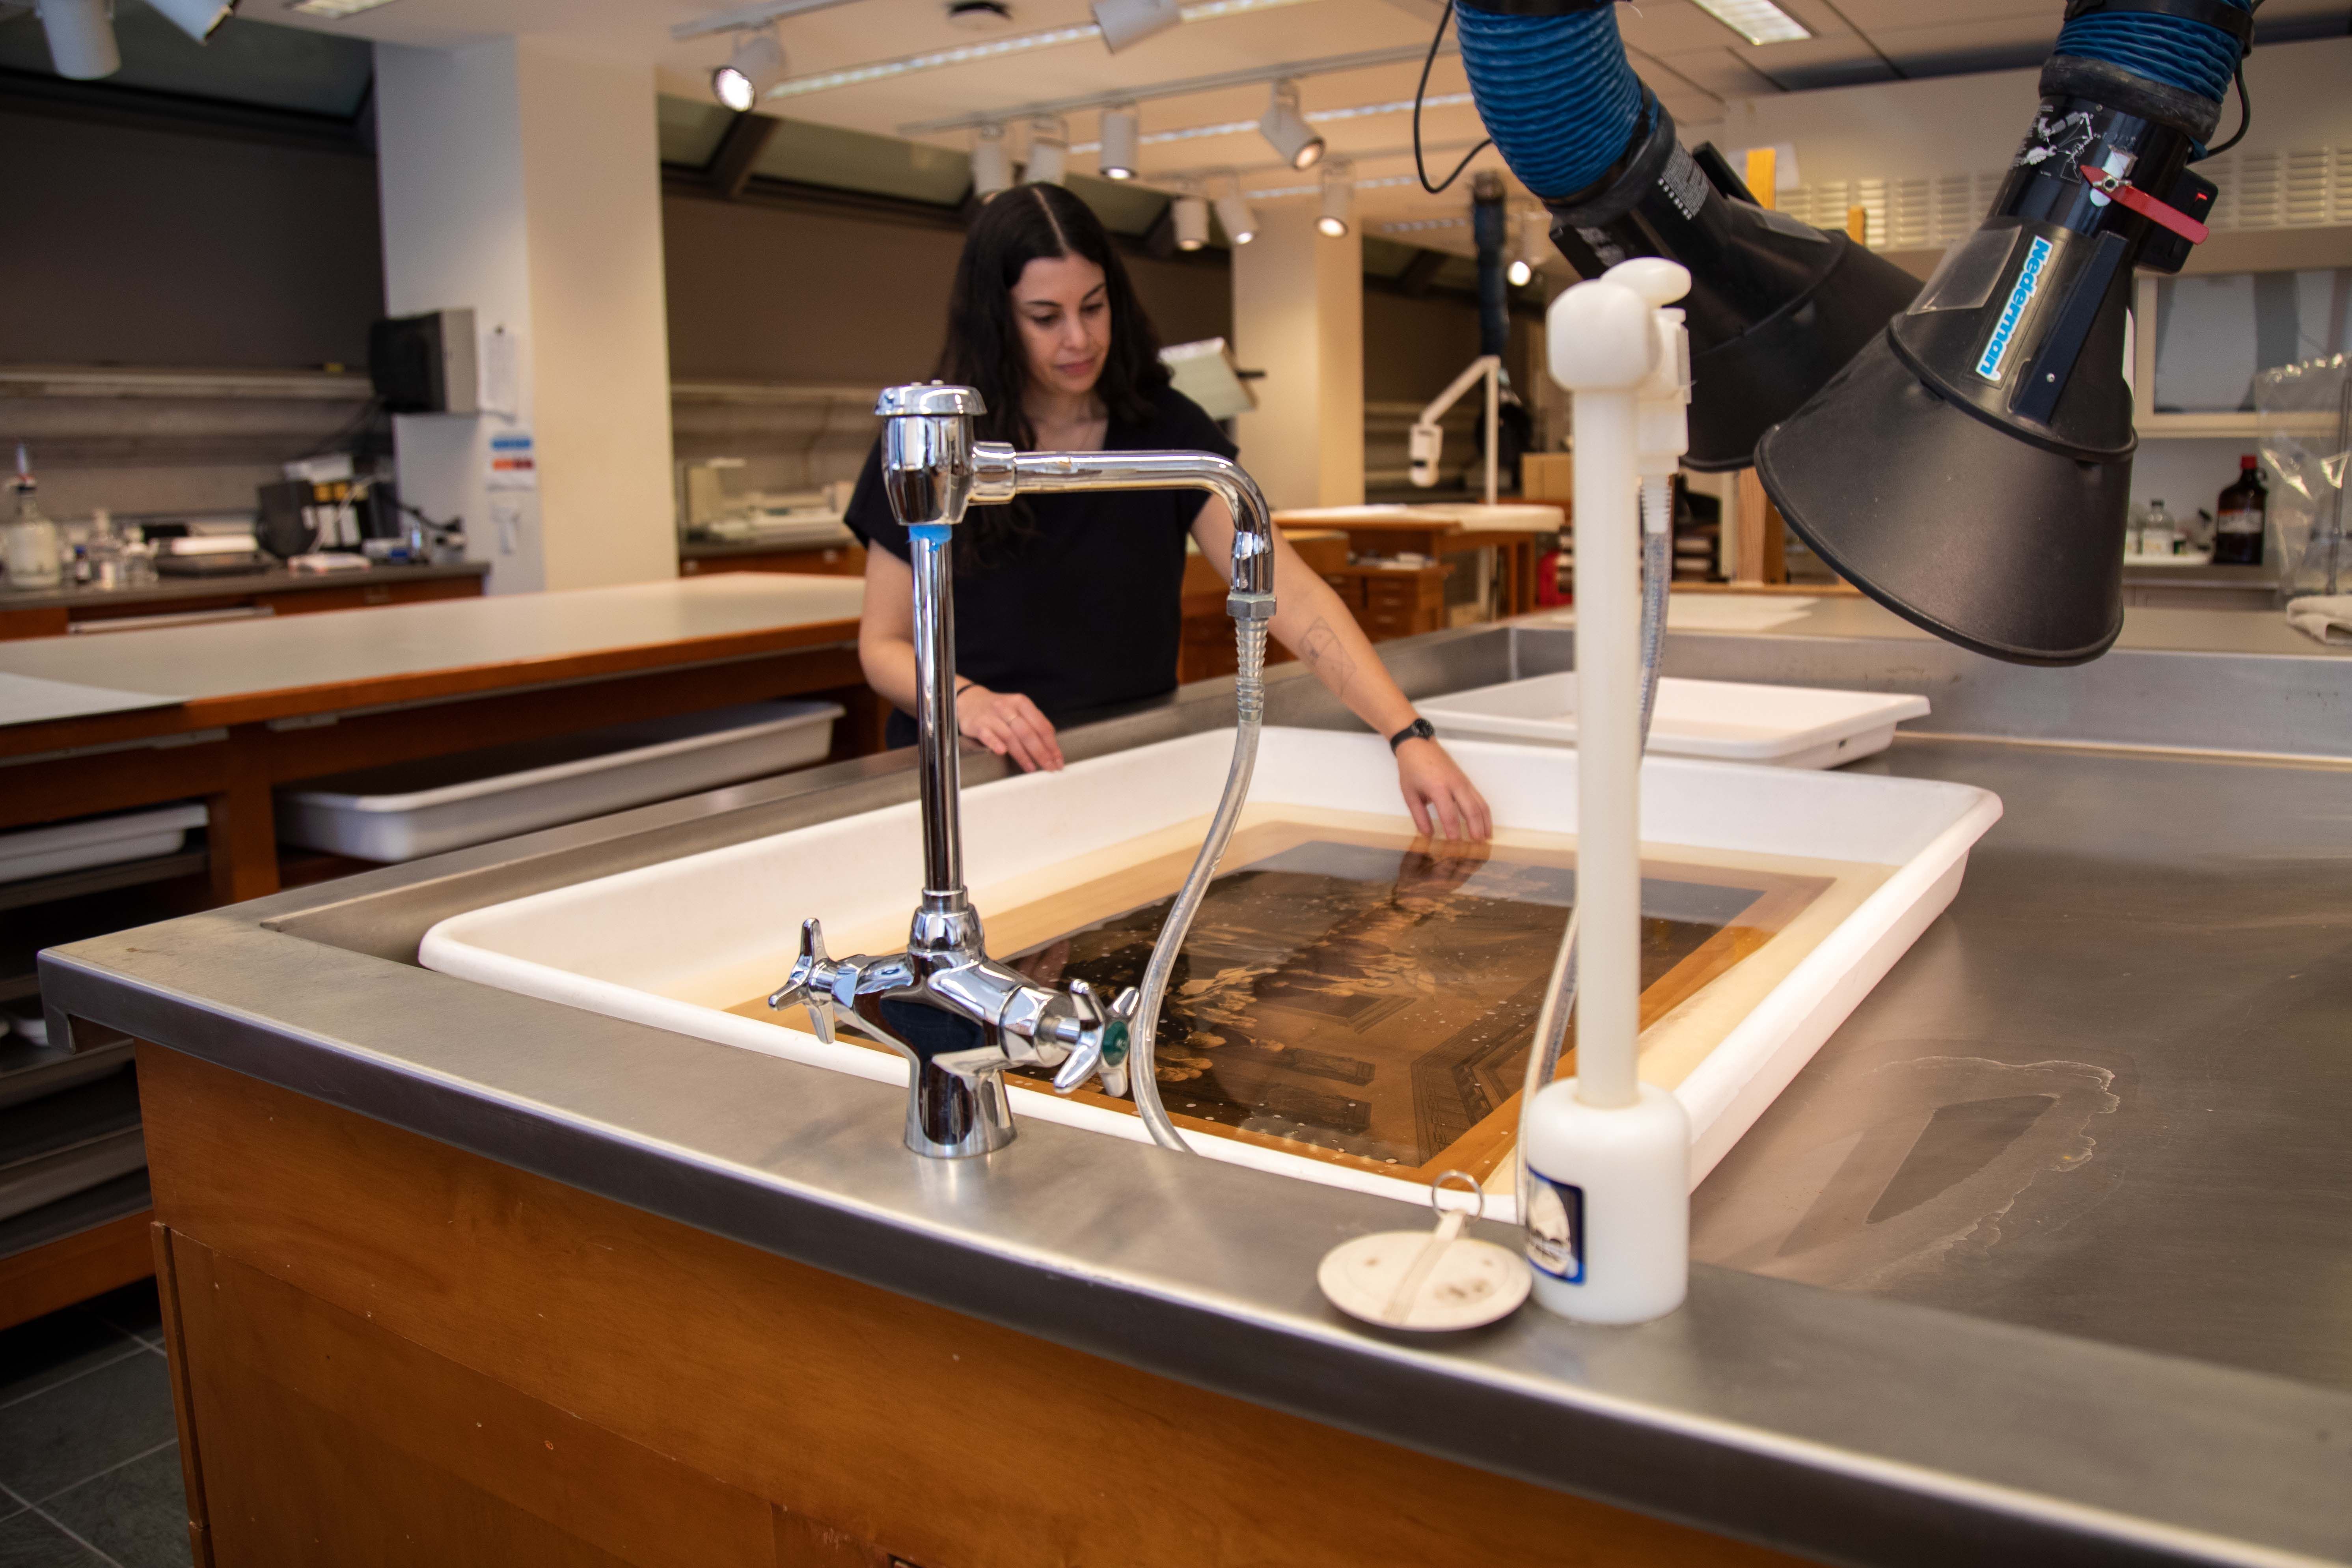 Loike in the paper conservation lab at the met. A piece of art is submerged in water in the sink in front of her.